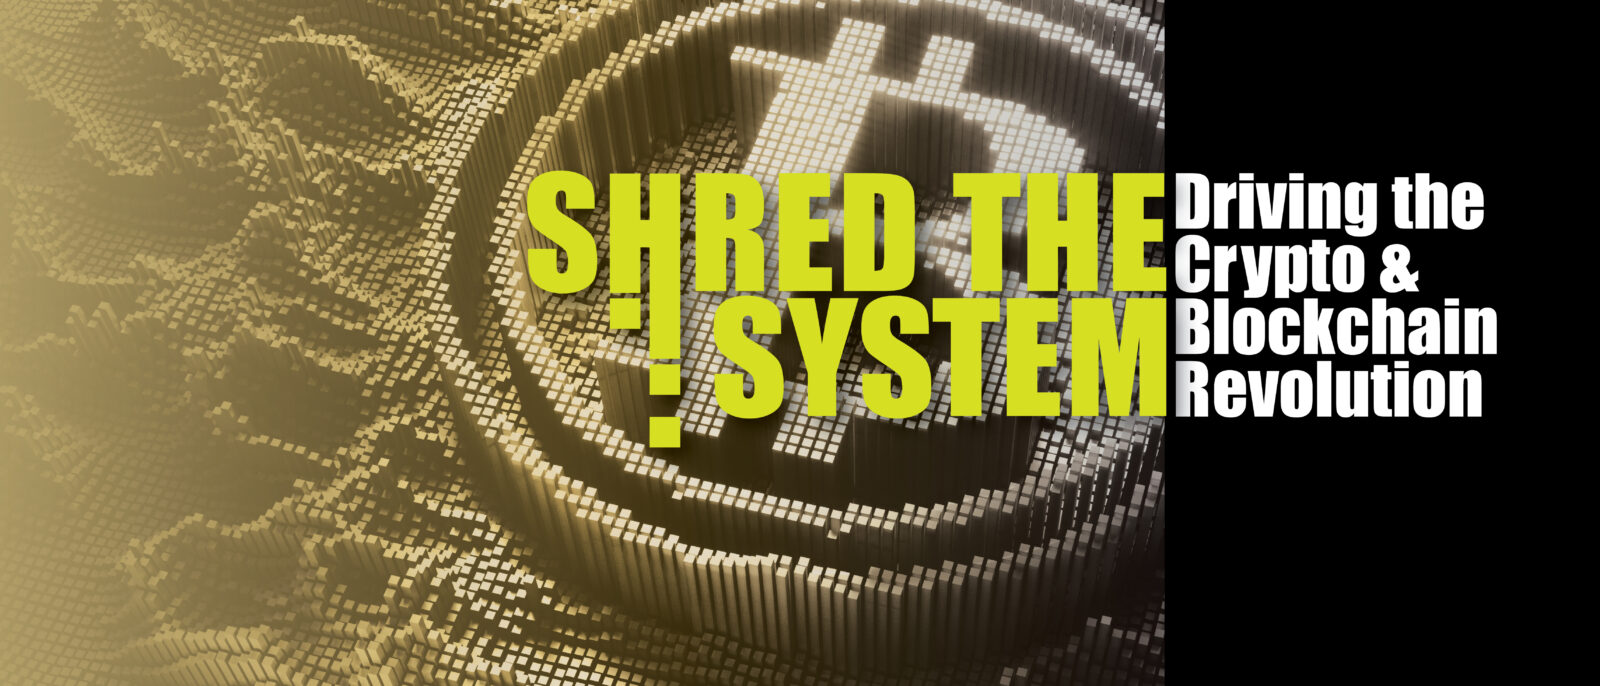 Registration opens for Shred the System: Driving the Crypto & Blockchain Revolution conference